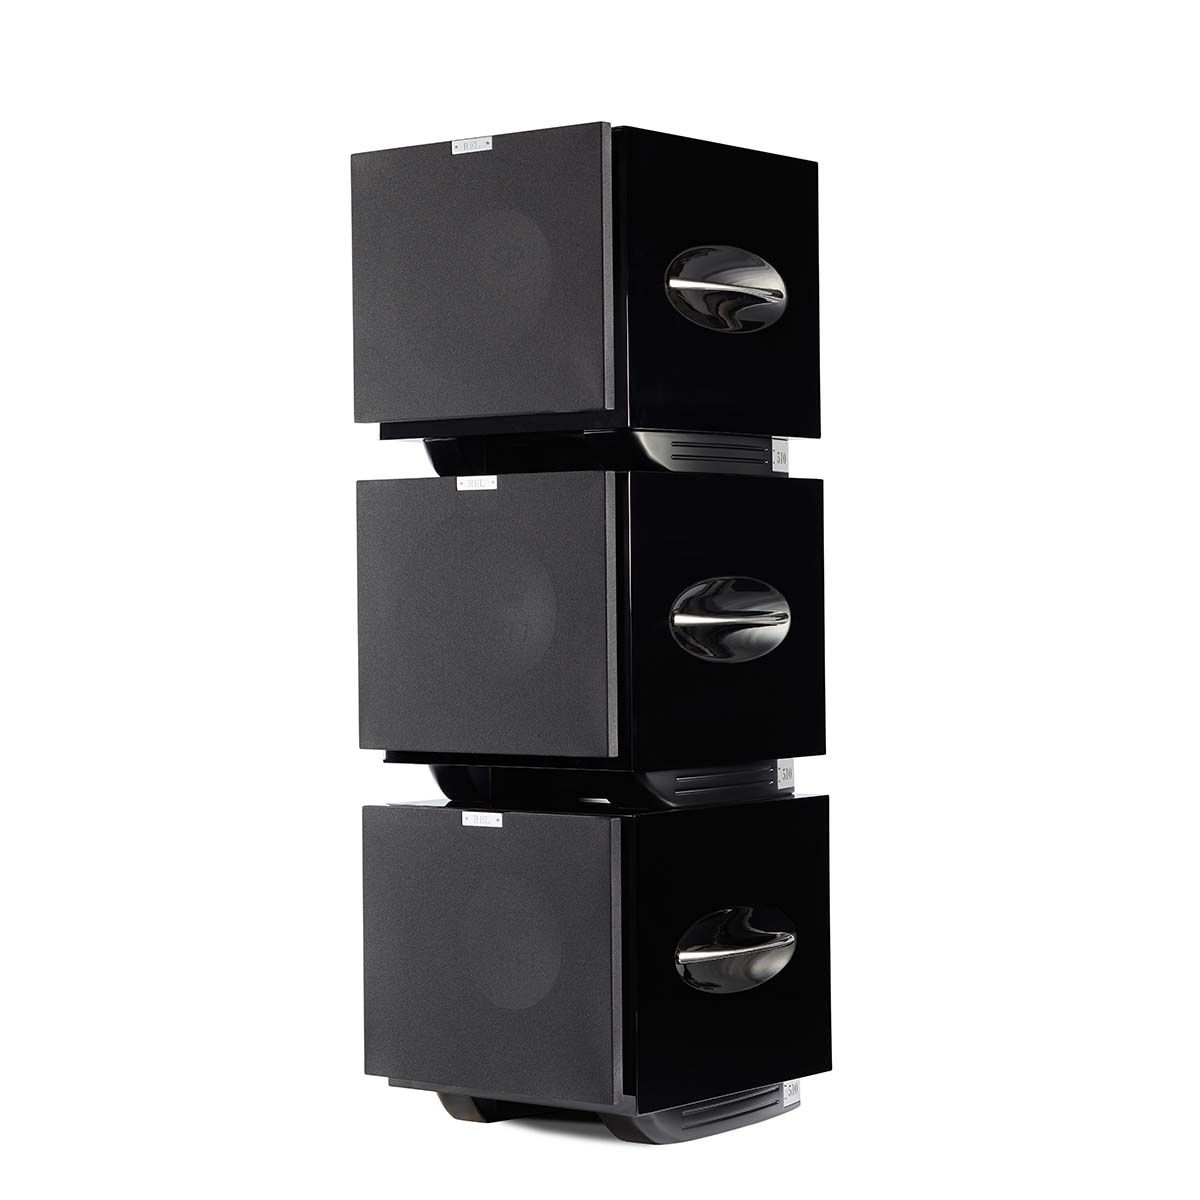 REL Acoustics S/510 Subwoofer, Black, stack of three wth grilles